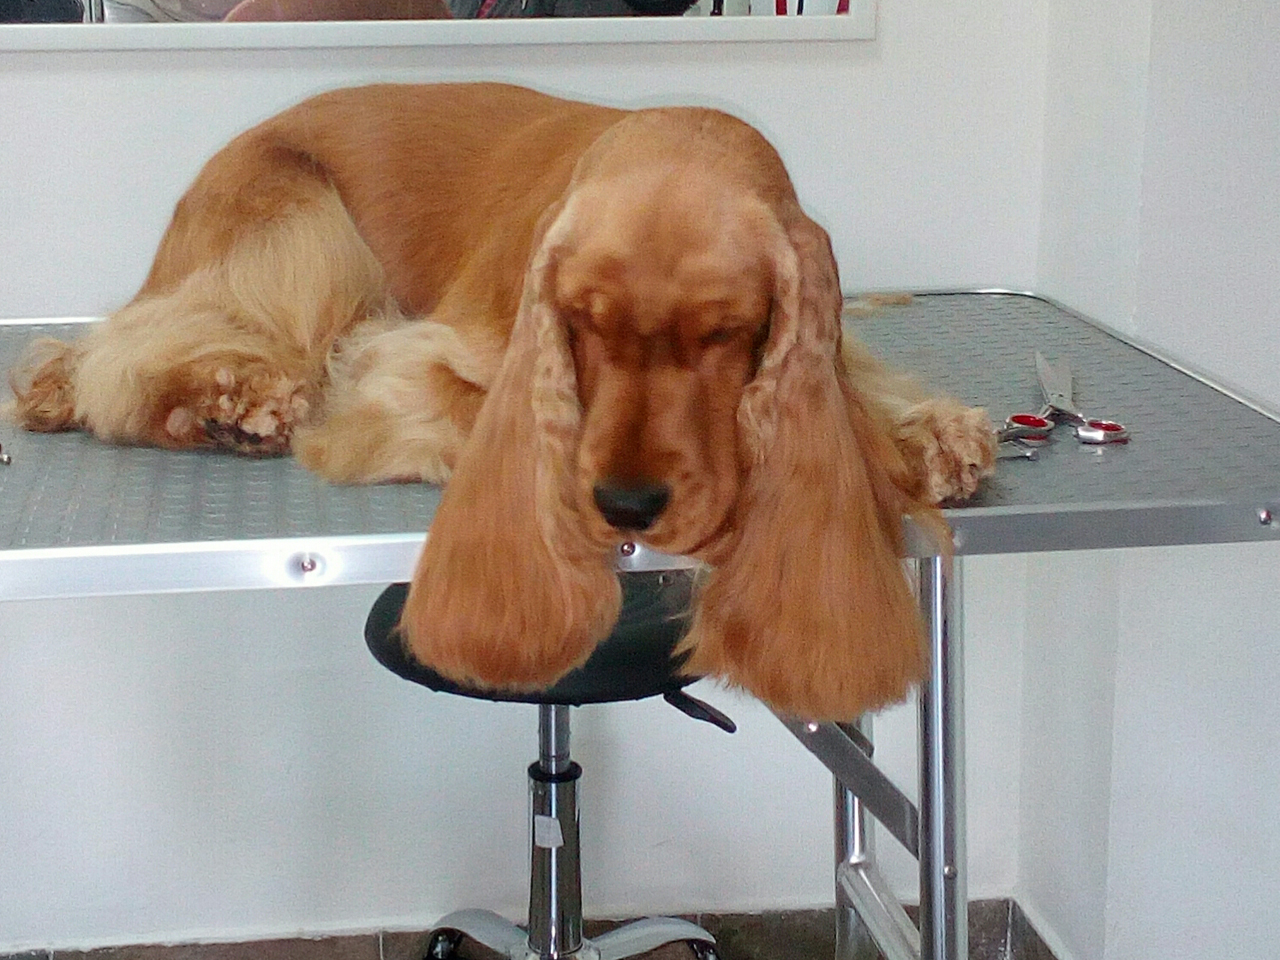 01 KUCA I MACA GROOMING SALON FOR DOGS AND CATS AND EDUCATION Pet salon, dog grooming Beograd